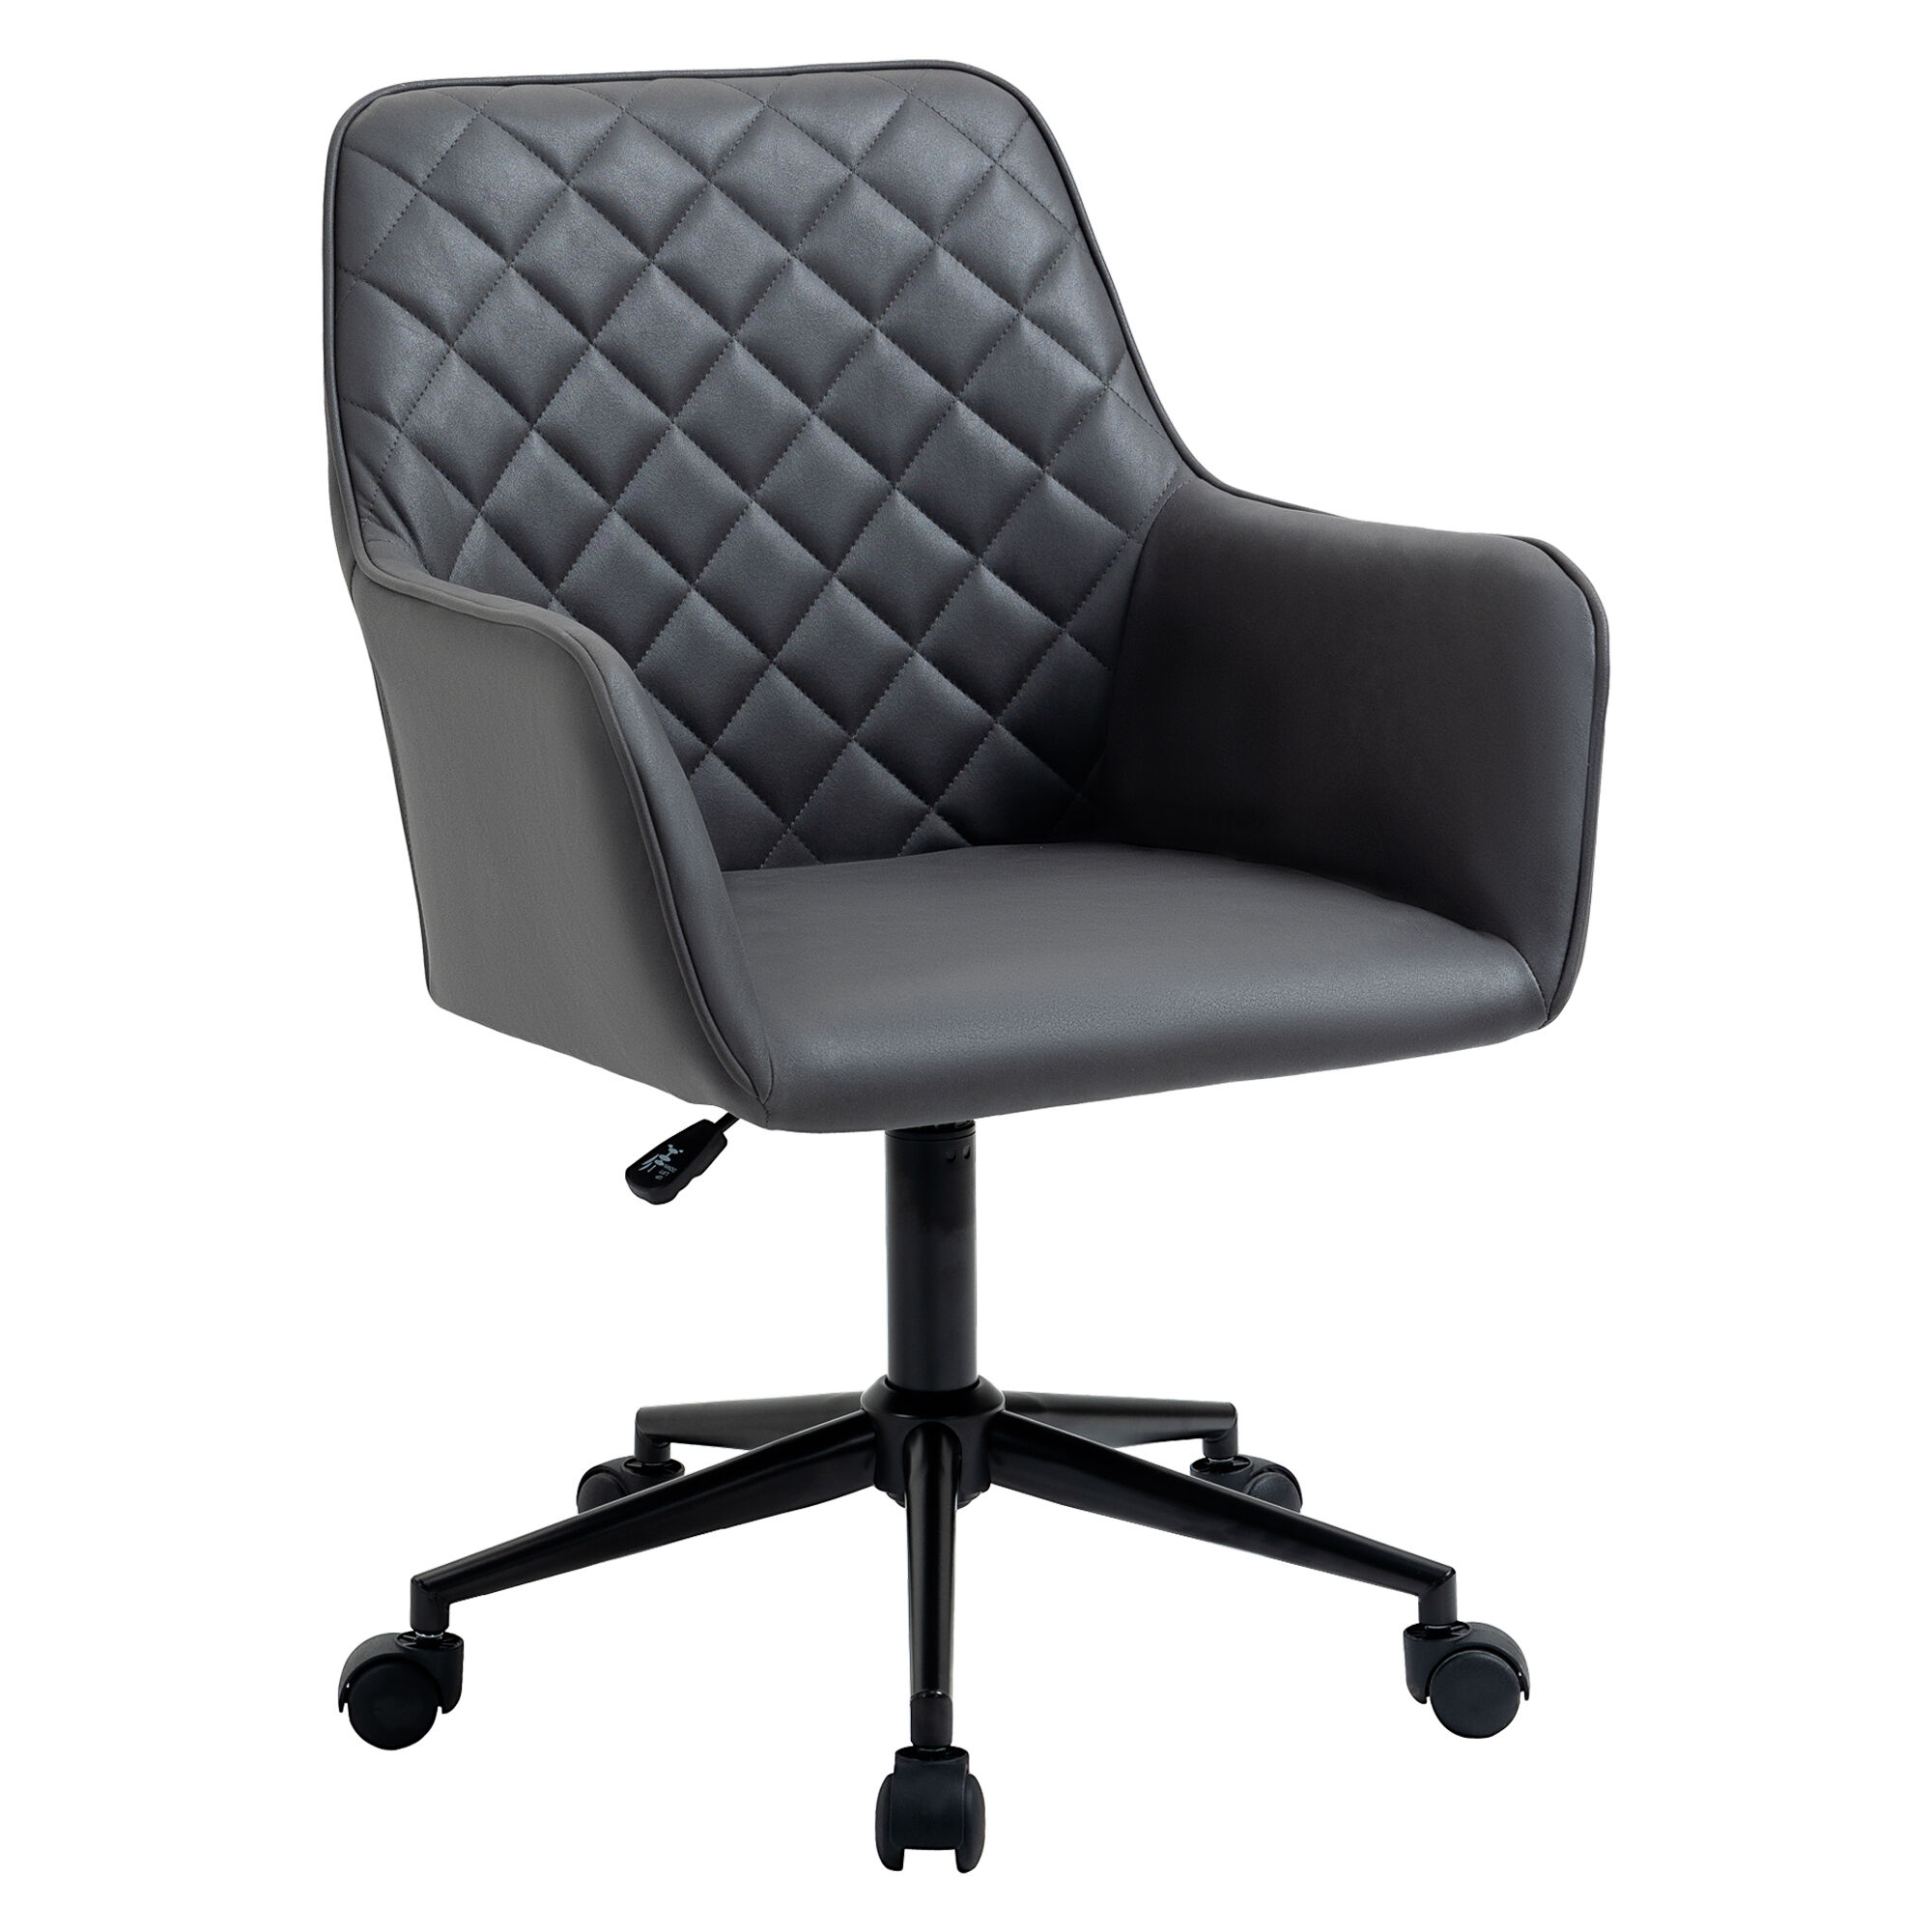 Vinsetto Home Office Chair with Adjustable Height  Diamond Line Design  Mid-Back Padded Armrests  and 360 Wheels  Dark Grey